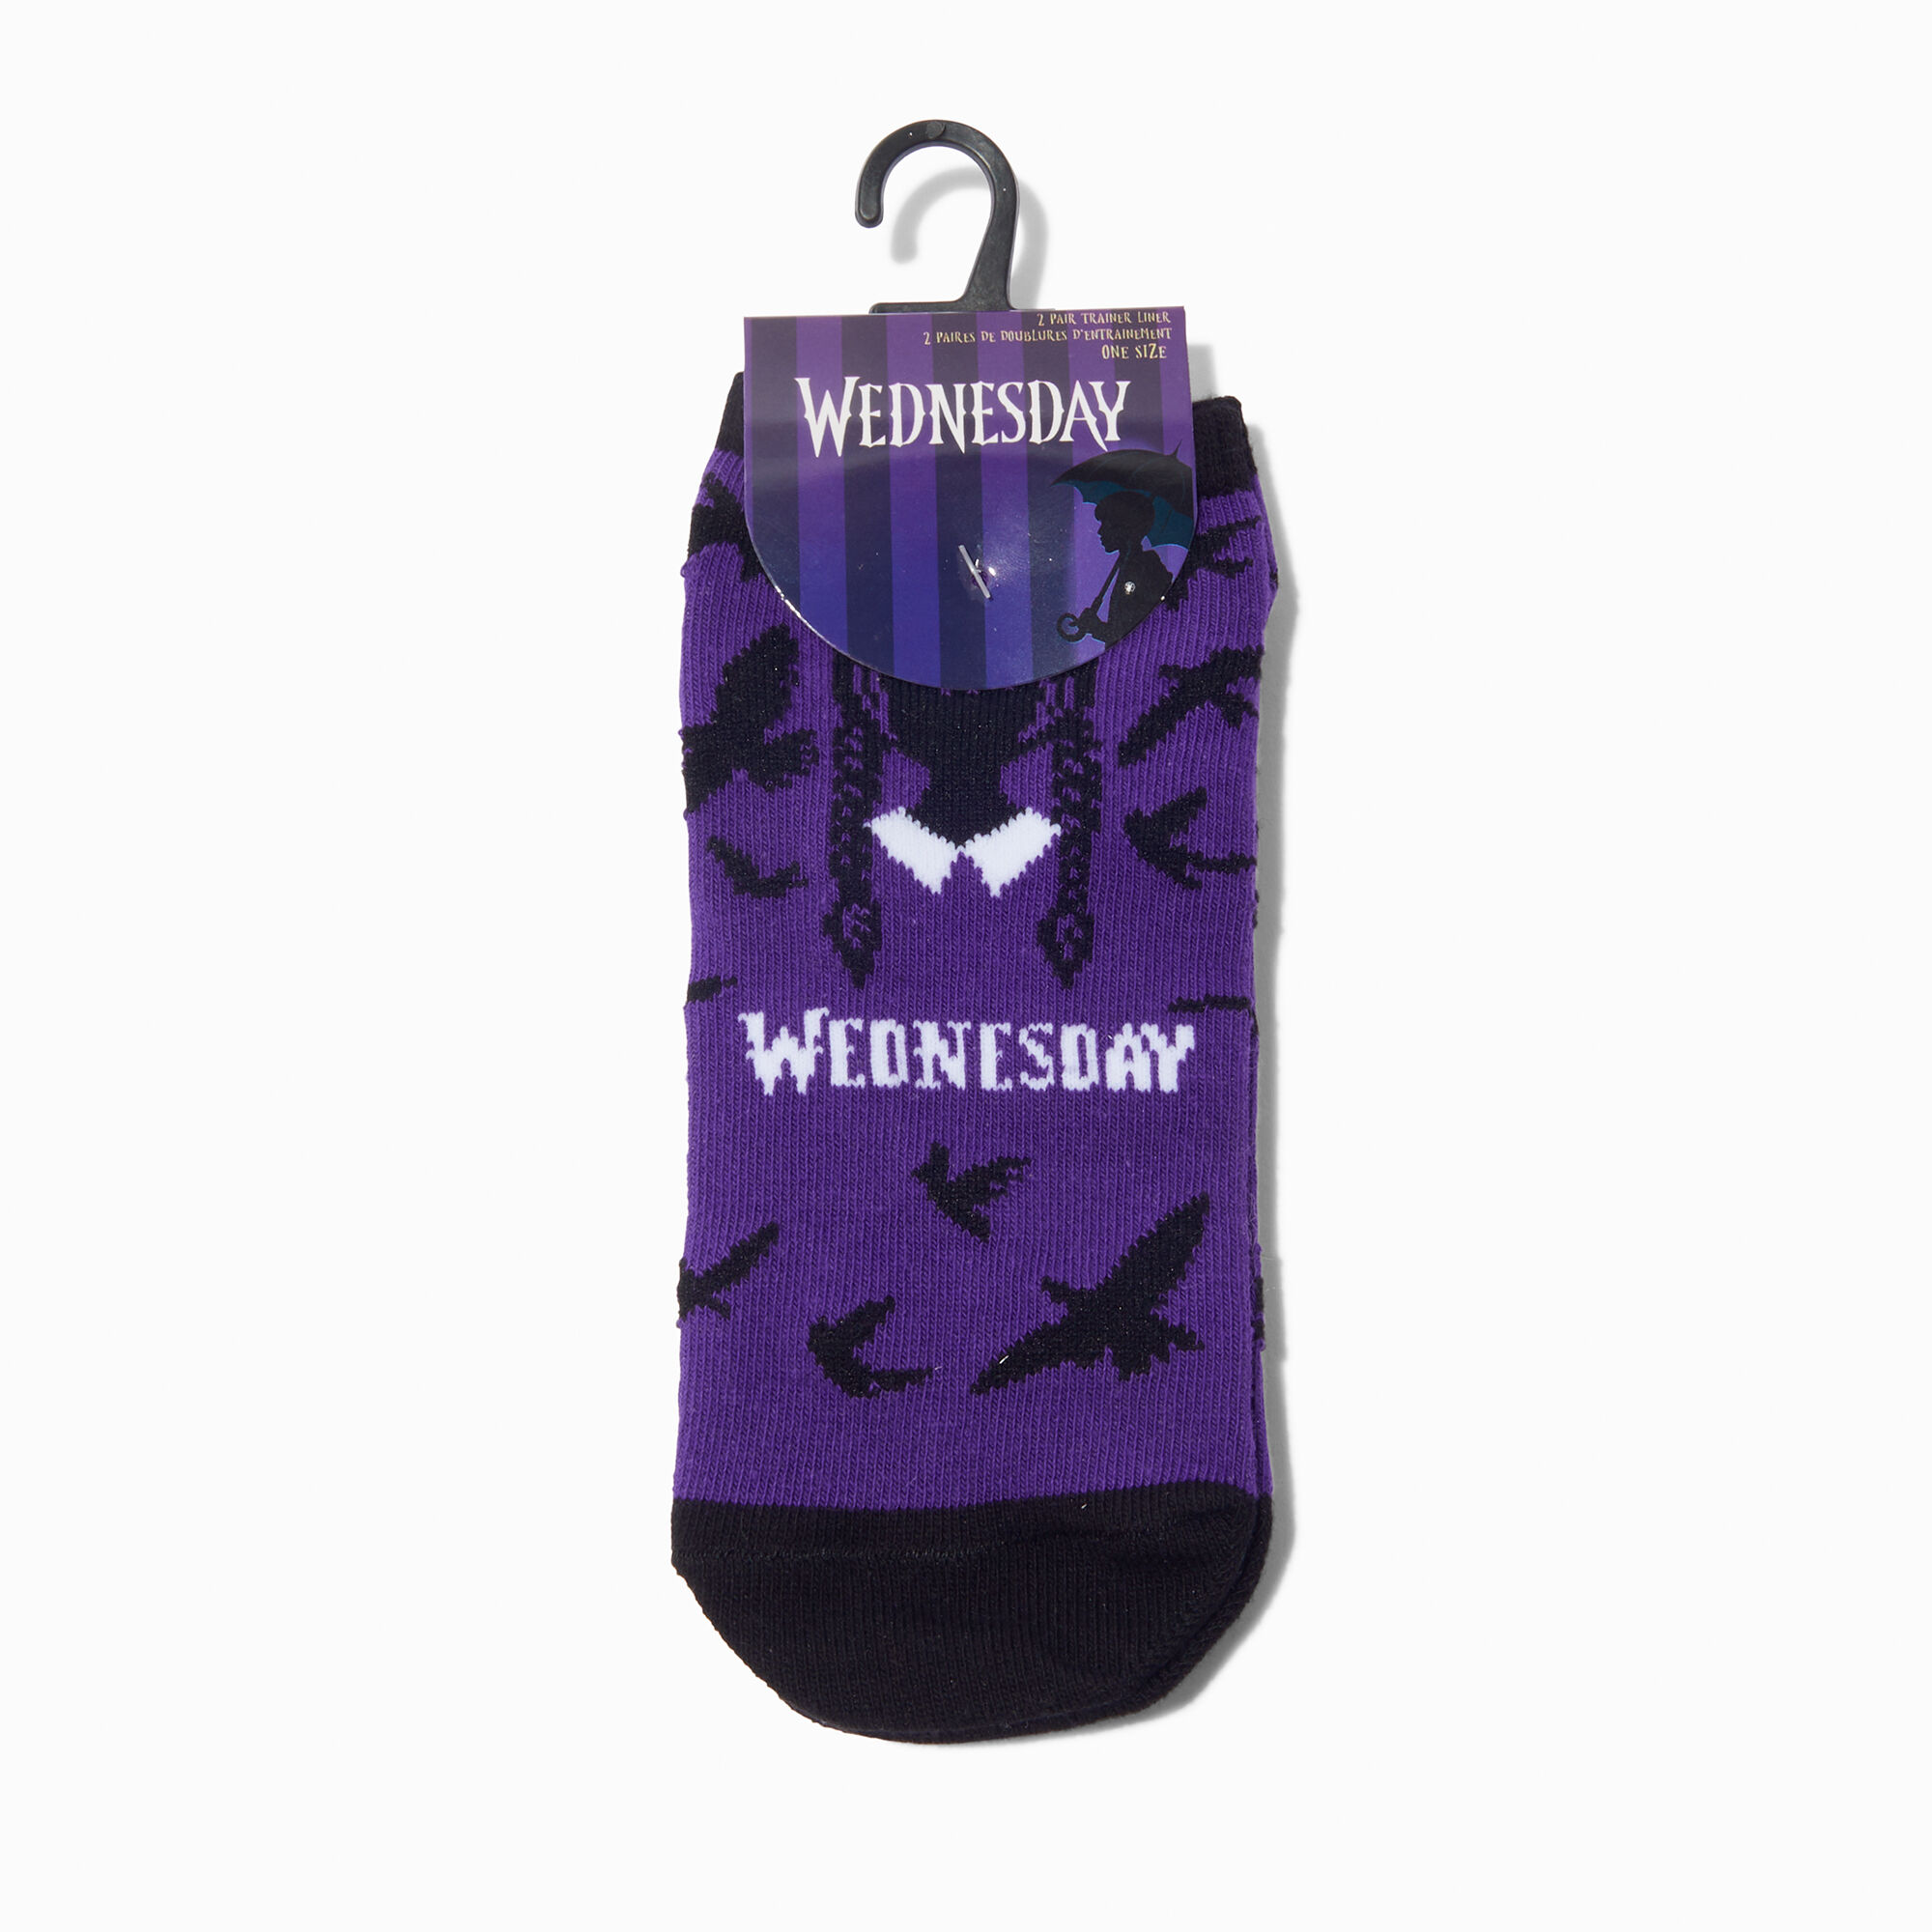 View Claires Wednesday Socks 2 Pack White information